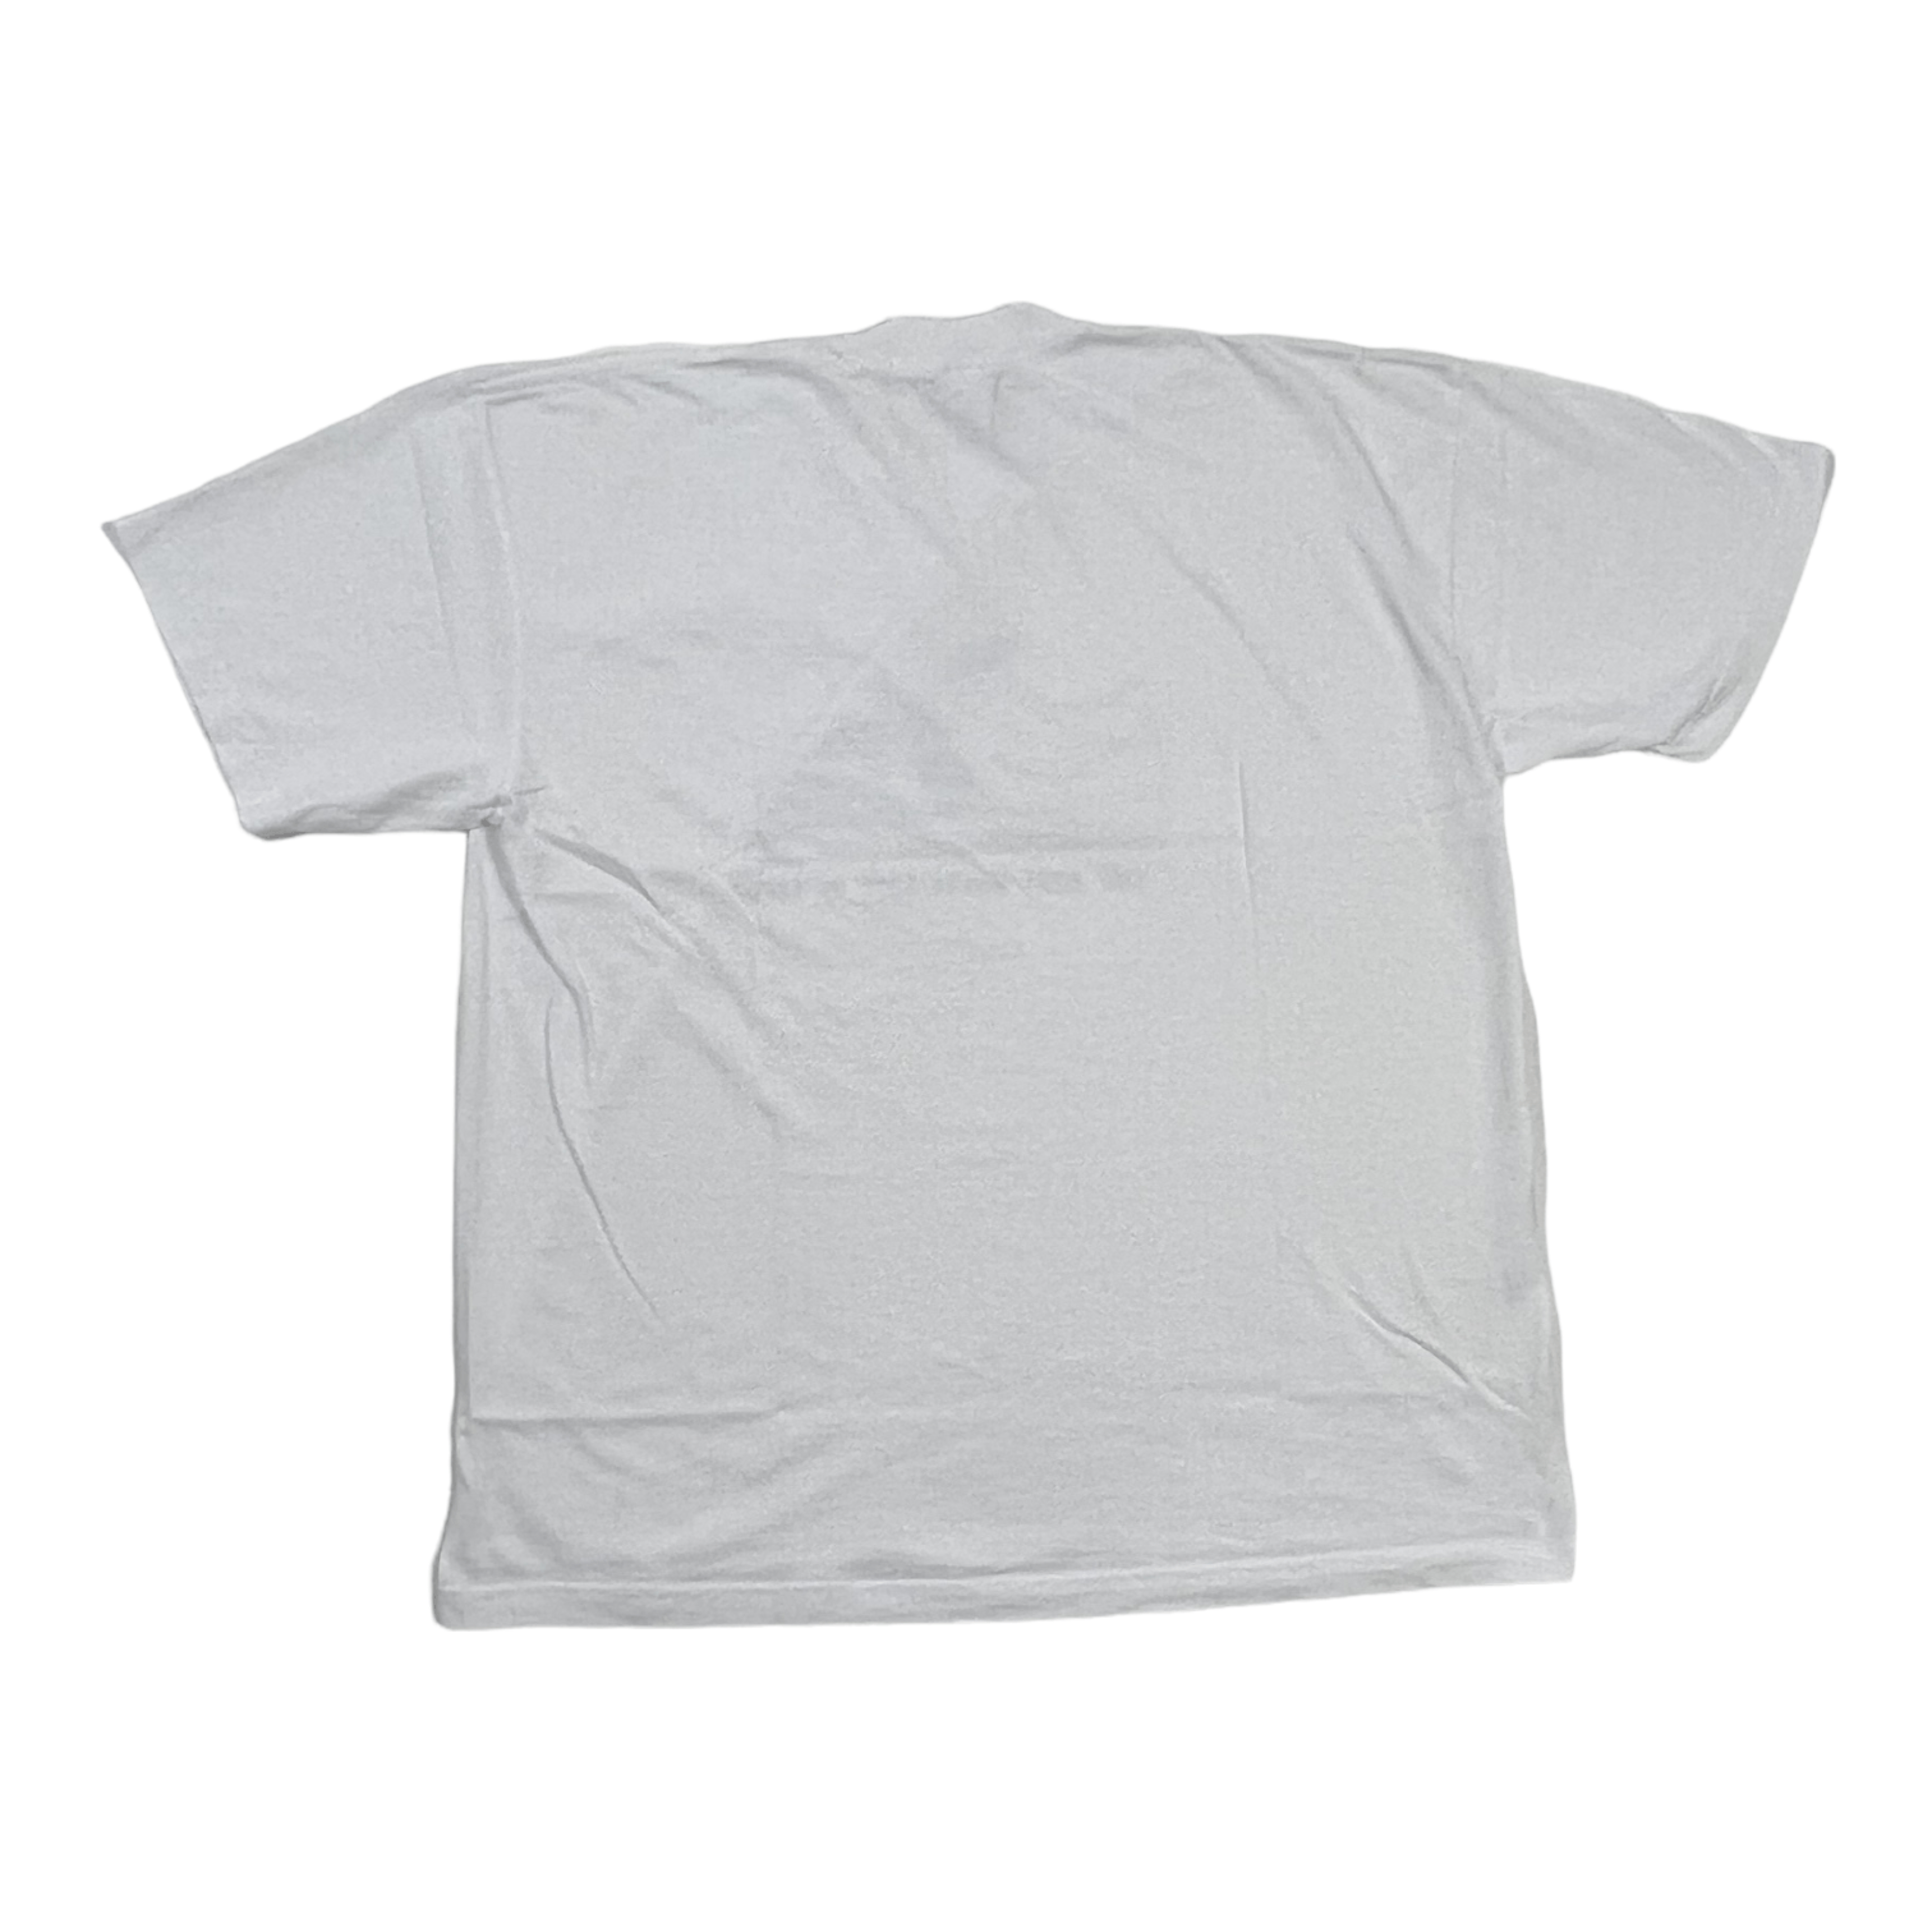 Alternate View 1 of Warren Lotas Most Hated Shoe Pack Short Sleeve Tee Shirt White